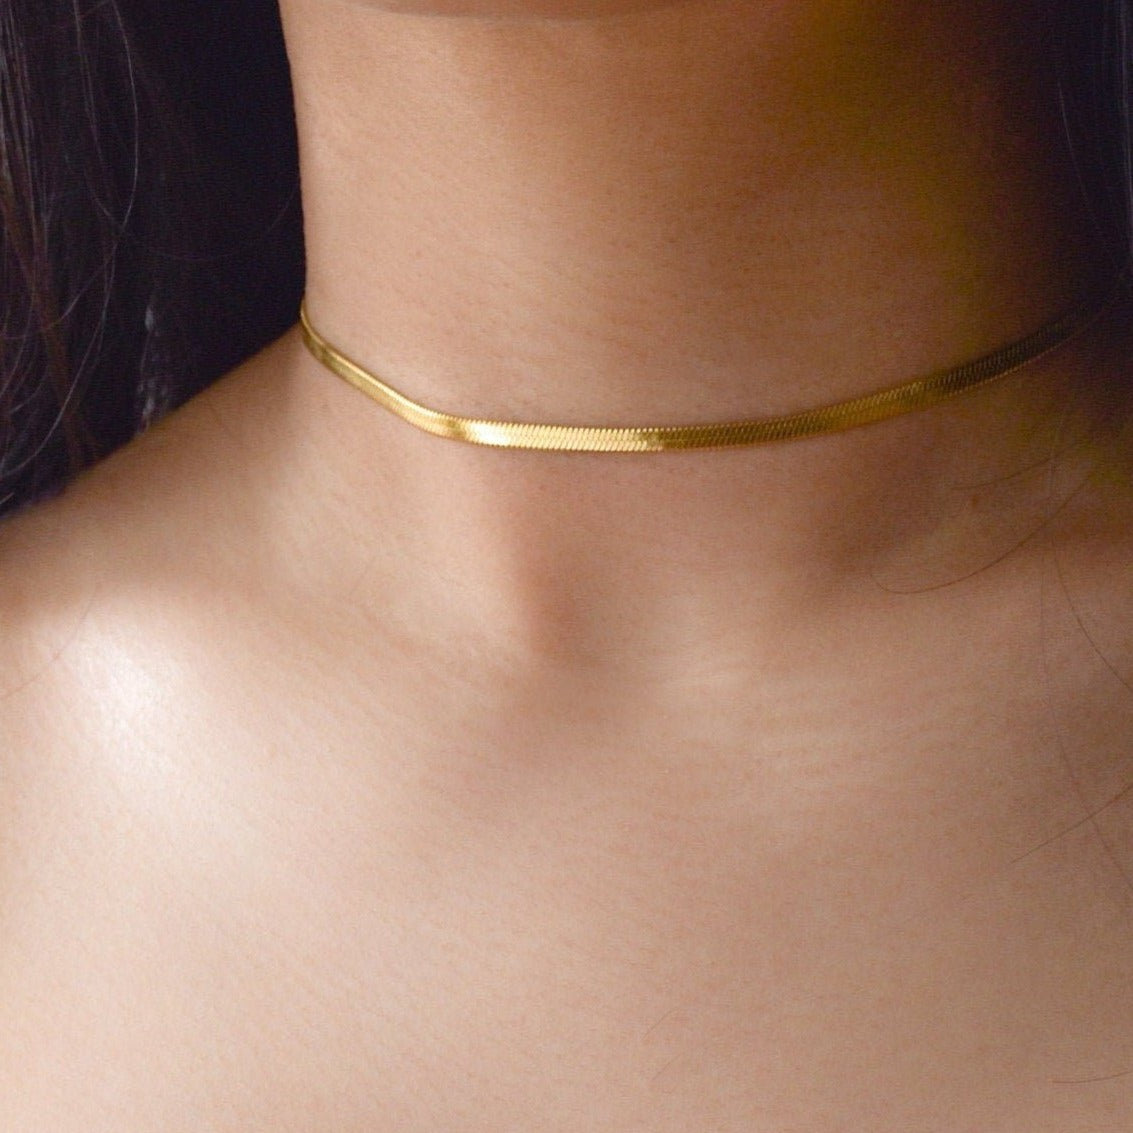 22 Carat Gold Choker Necklace at 5490.00 INR in Ludhiana | Bant Ram  Jewellers